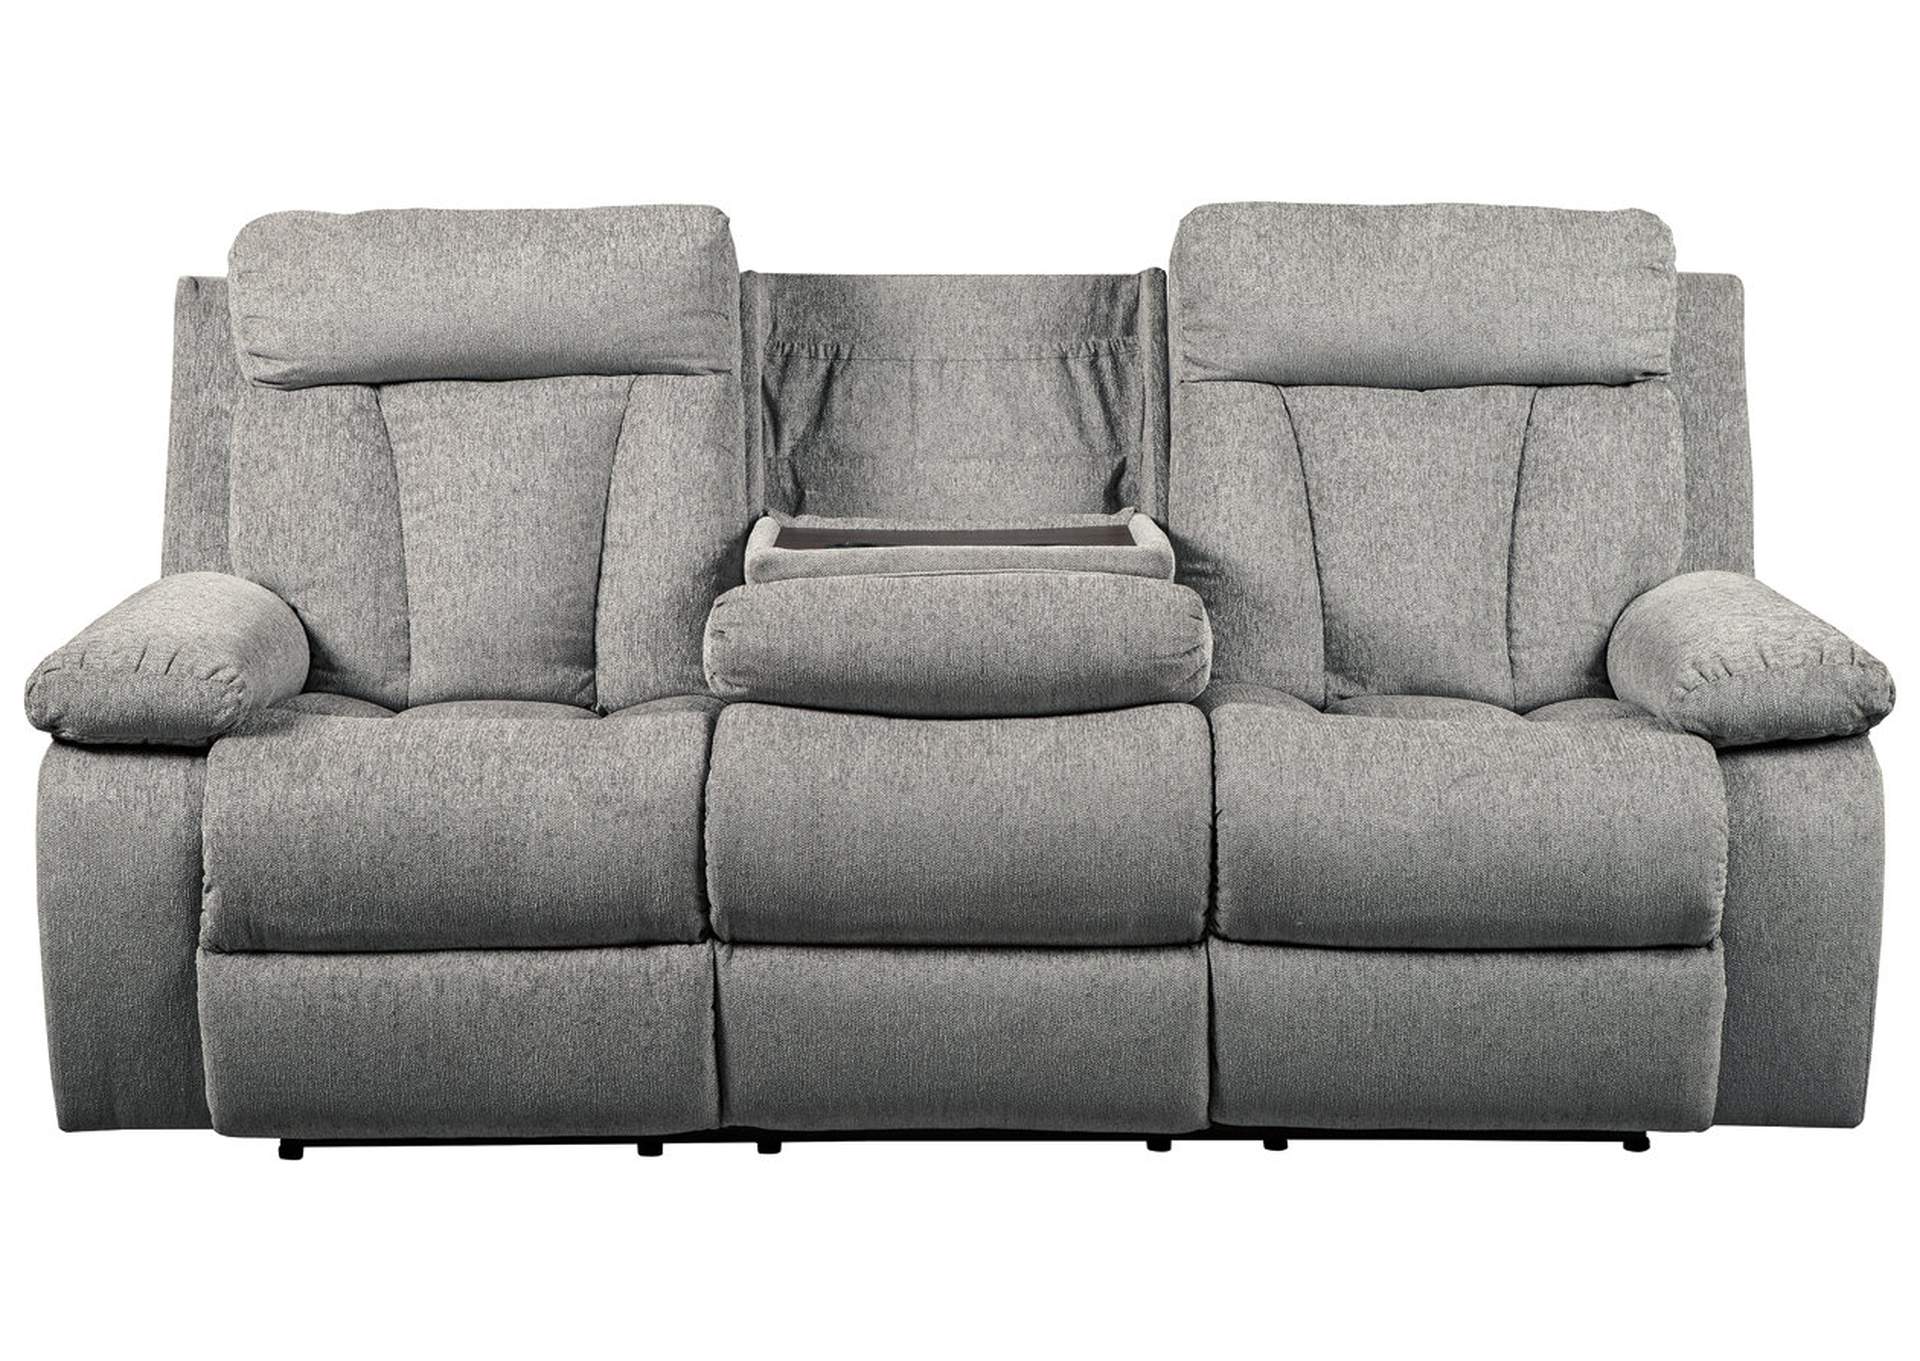 Mitchiner Reclining Sofa and Loveseat with 2 Recliners,Signature Design By Ashley